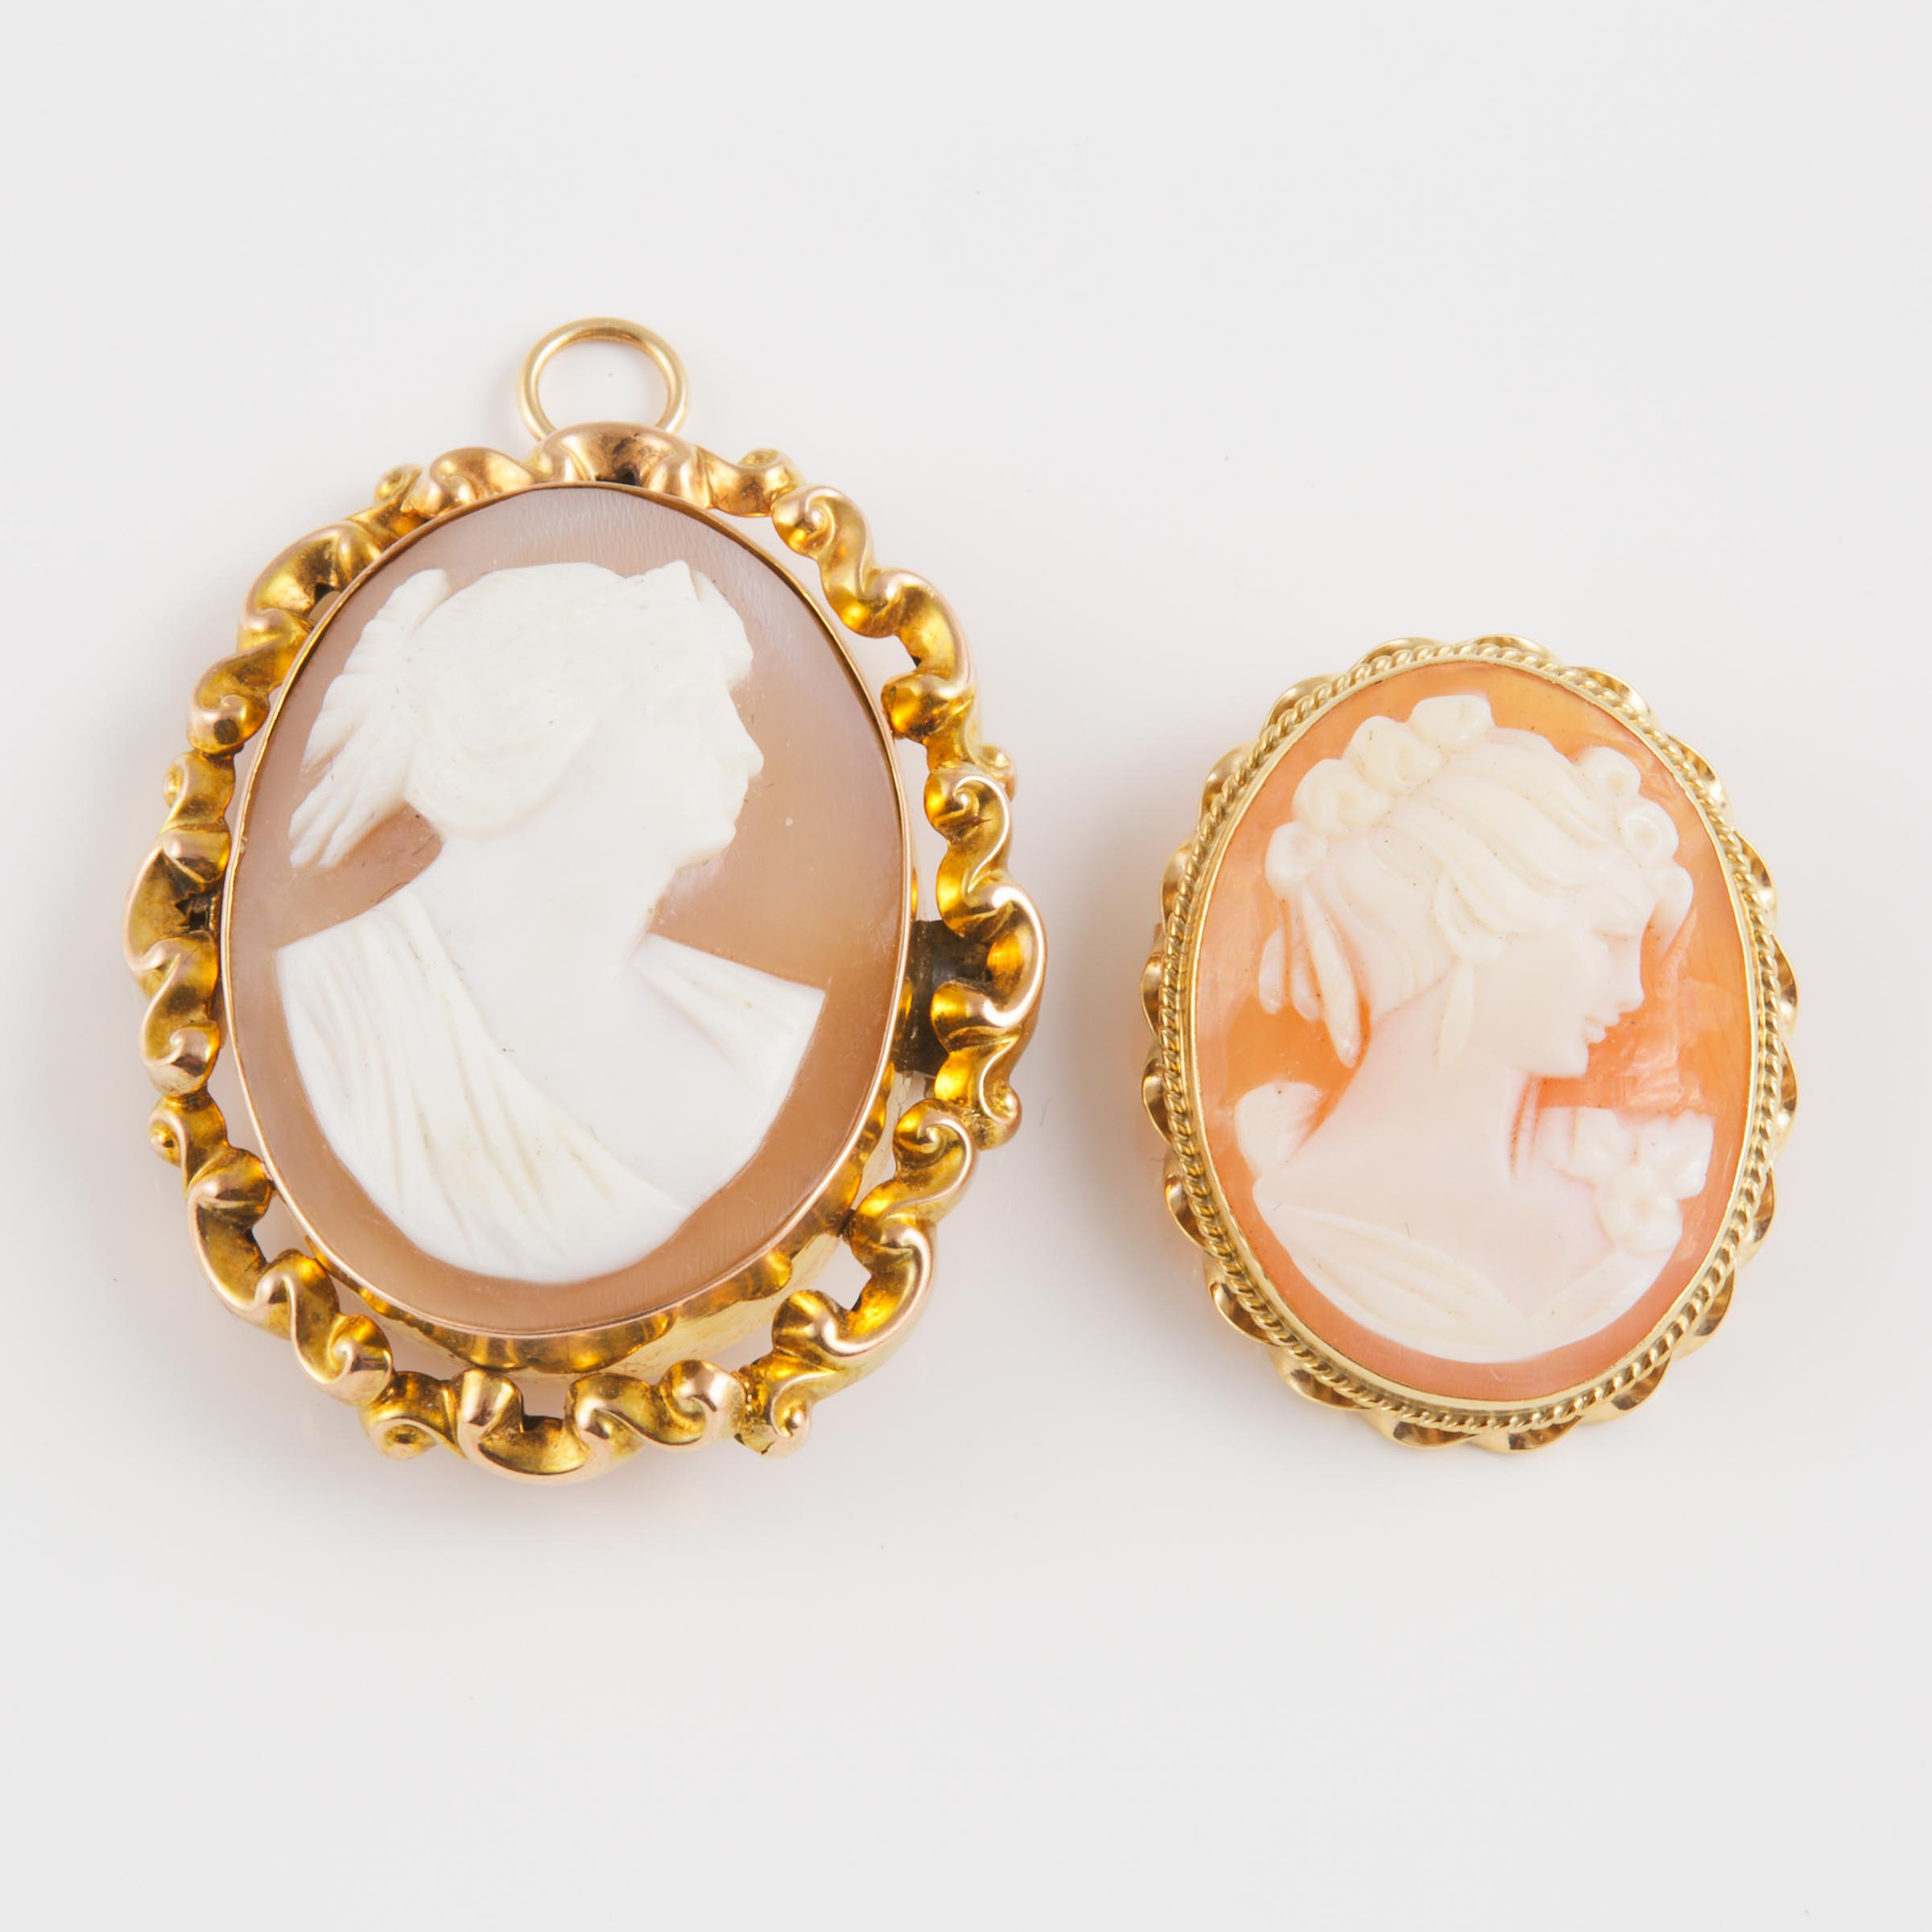 2 Oval Carved Shell Cameos